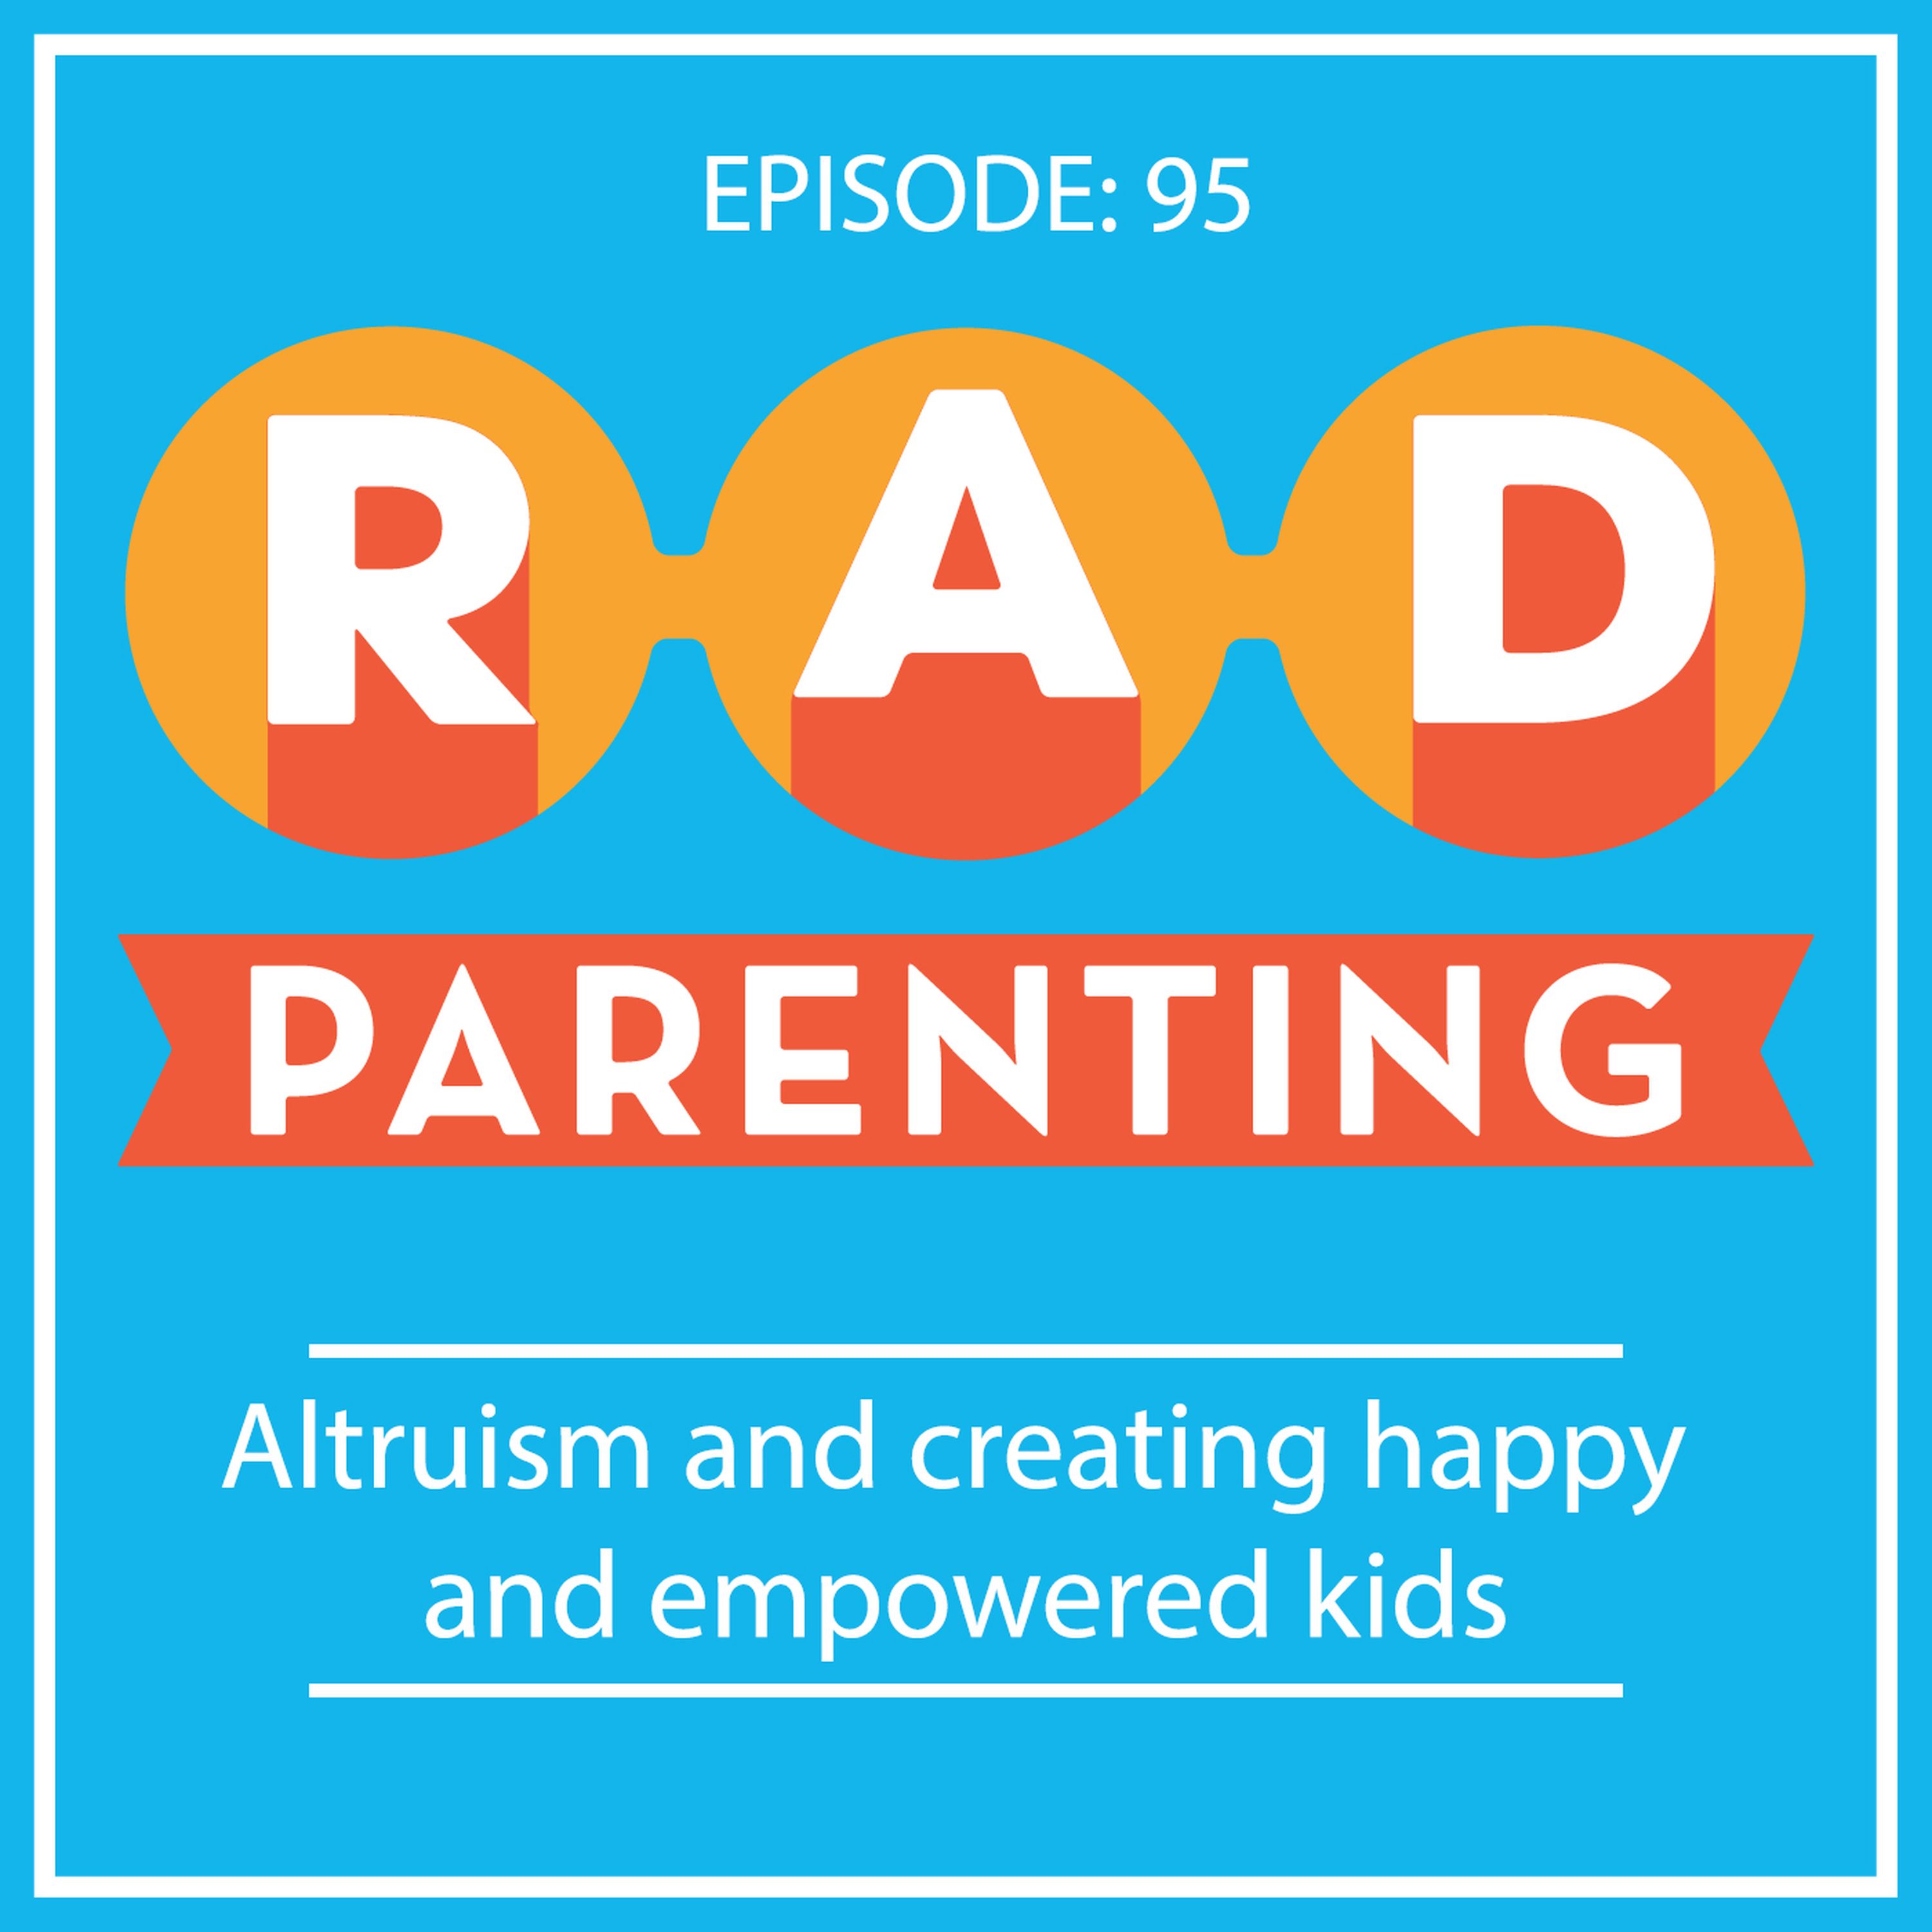 Altruism and creating happy and empowered kids.